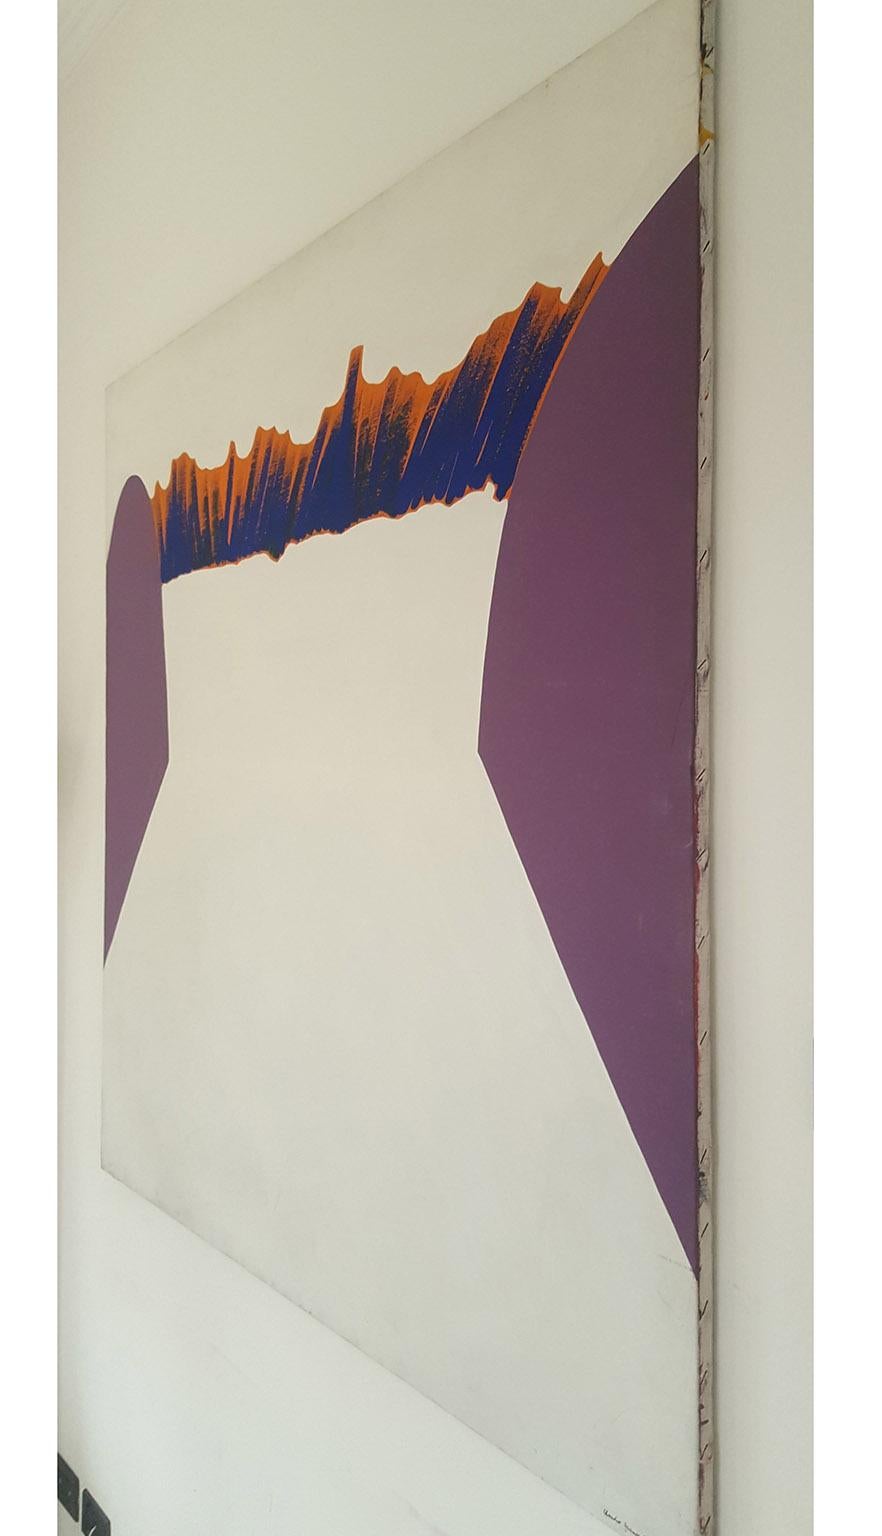 Italian Midcentury Modern Abstract Painting by Claudio Granaroli, Signed and Dated, 1972 For Sale